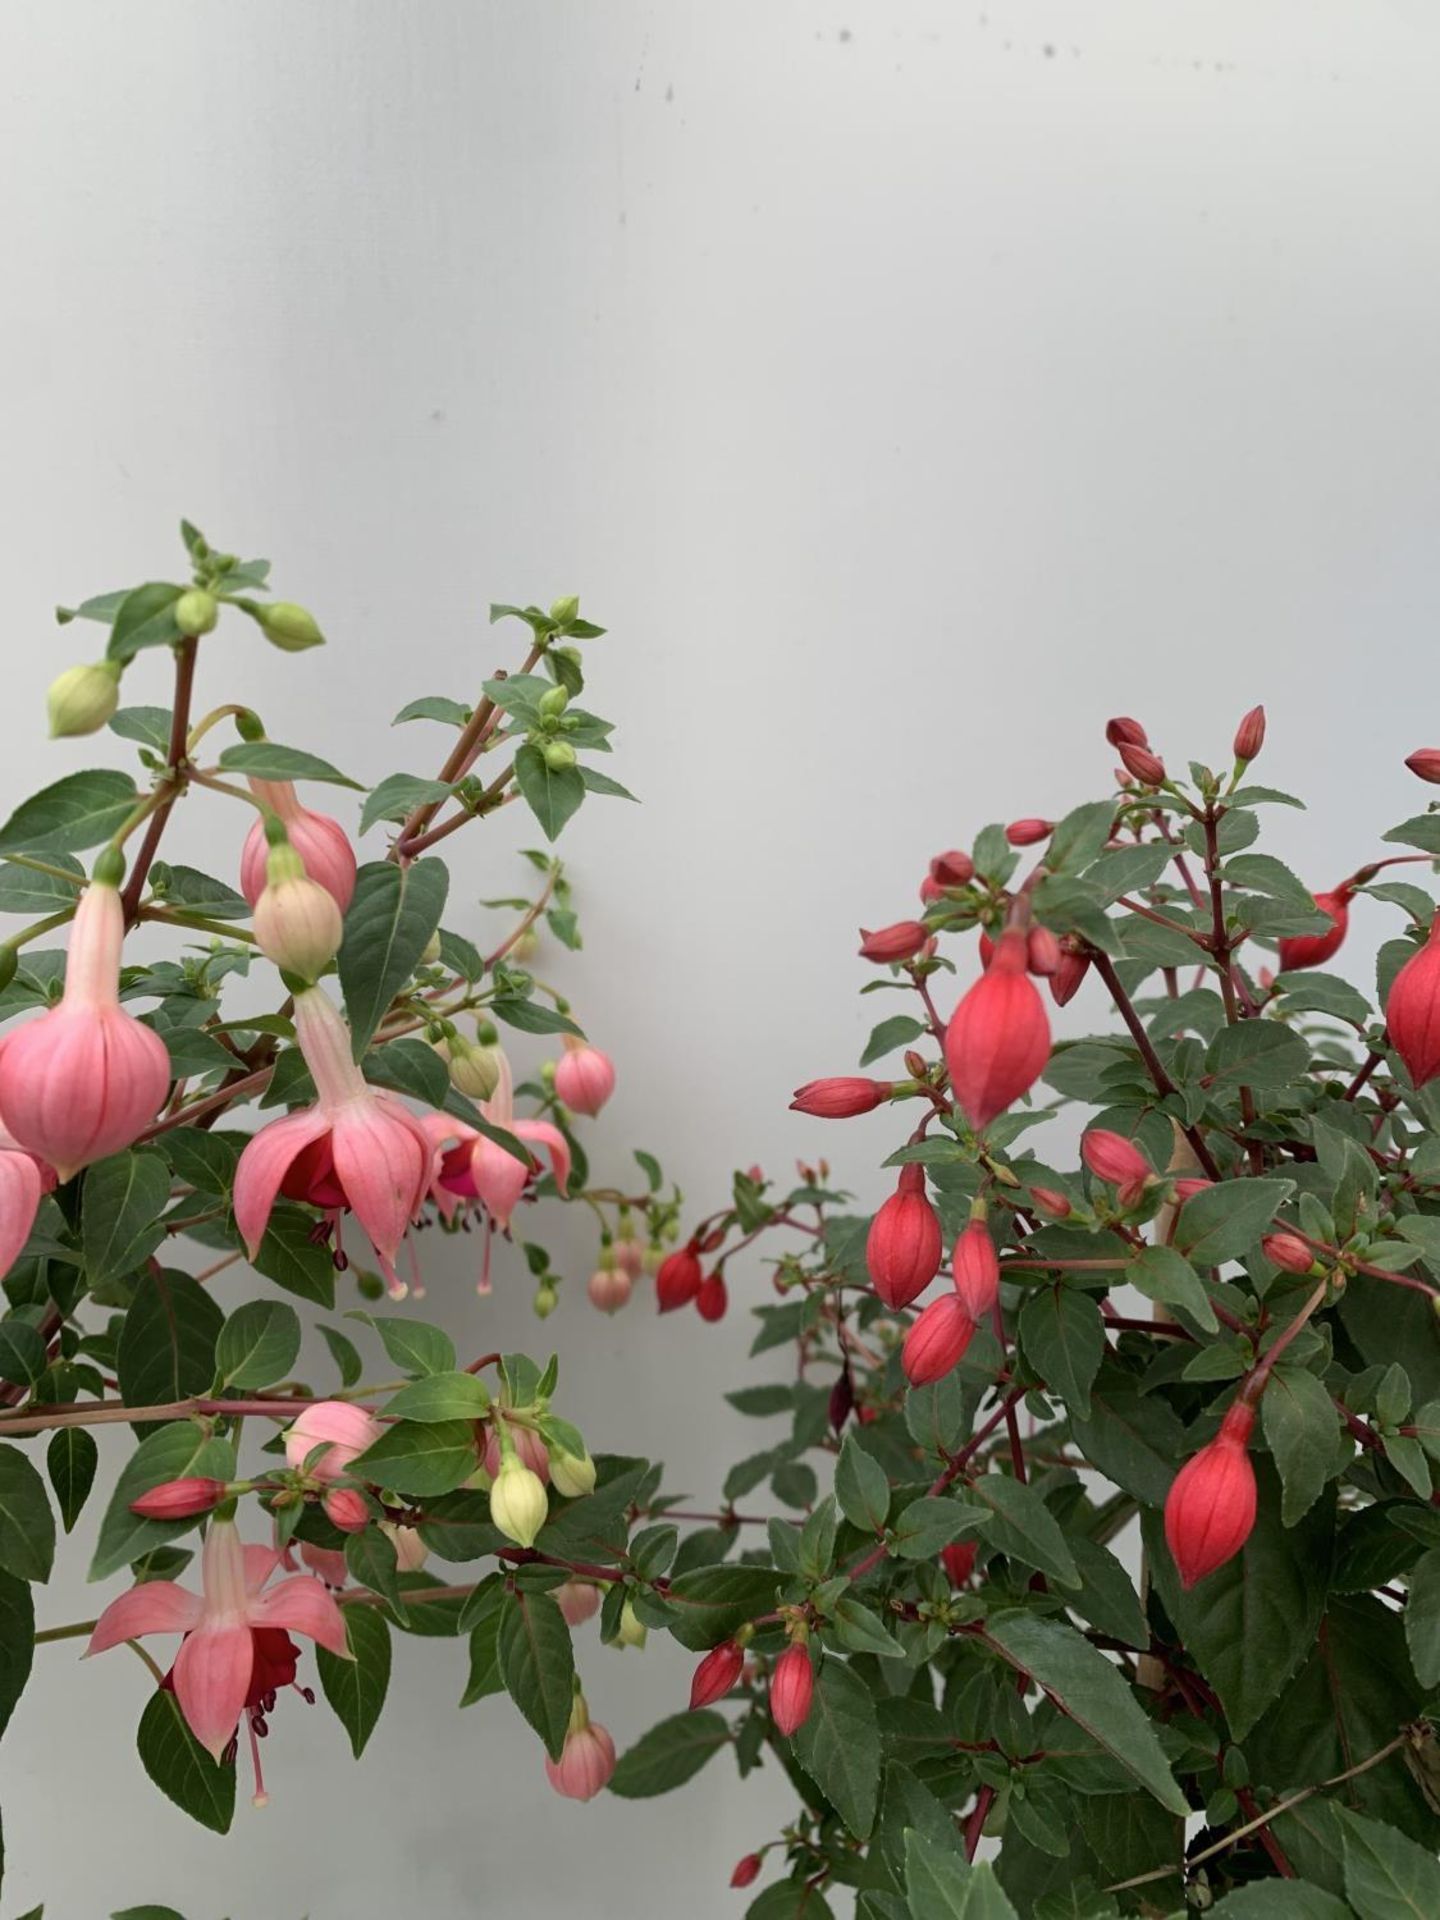 TWO BELLA STANDARD FUCHSIA IN A 3 LTR POTS 70CM -80CM TALL TO BE SOLD FOR THE TWO PLUS VAT - Image 6 of 8